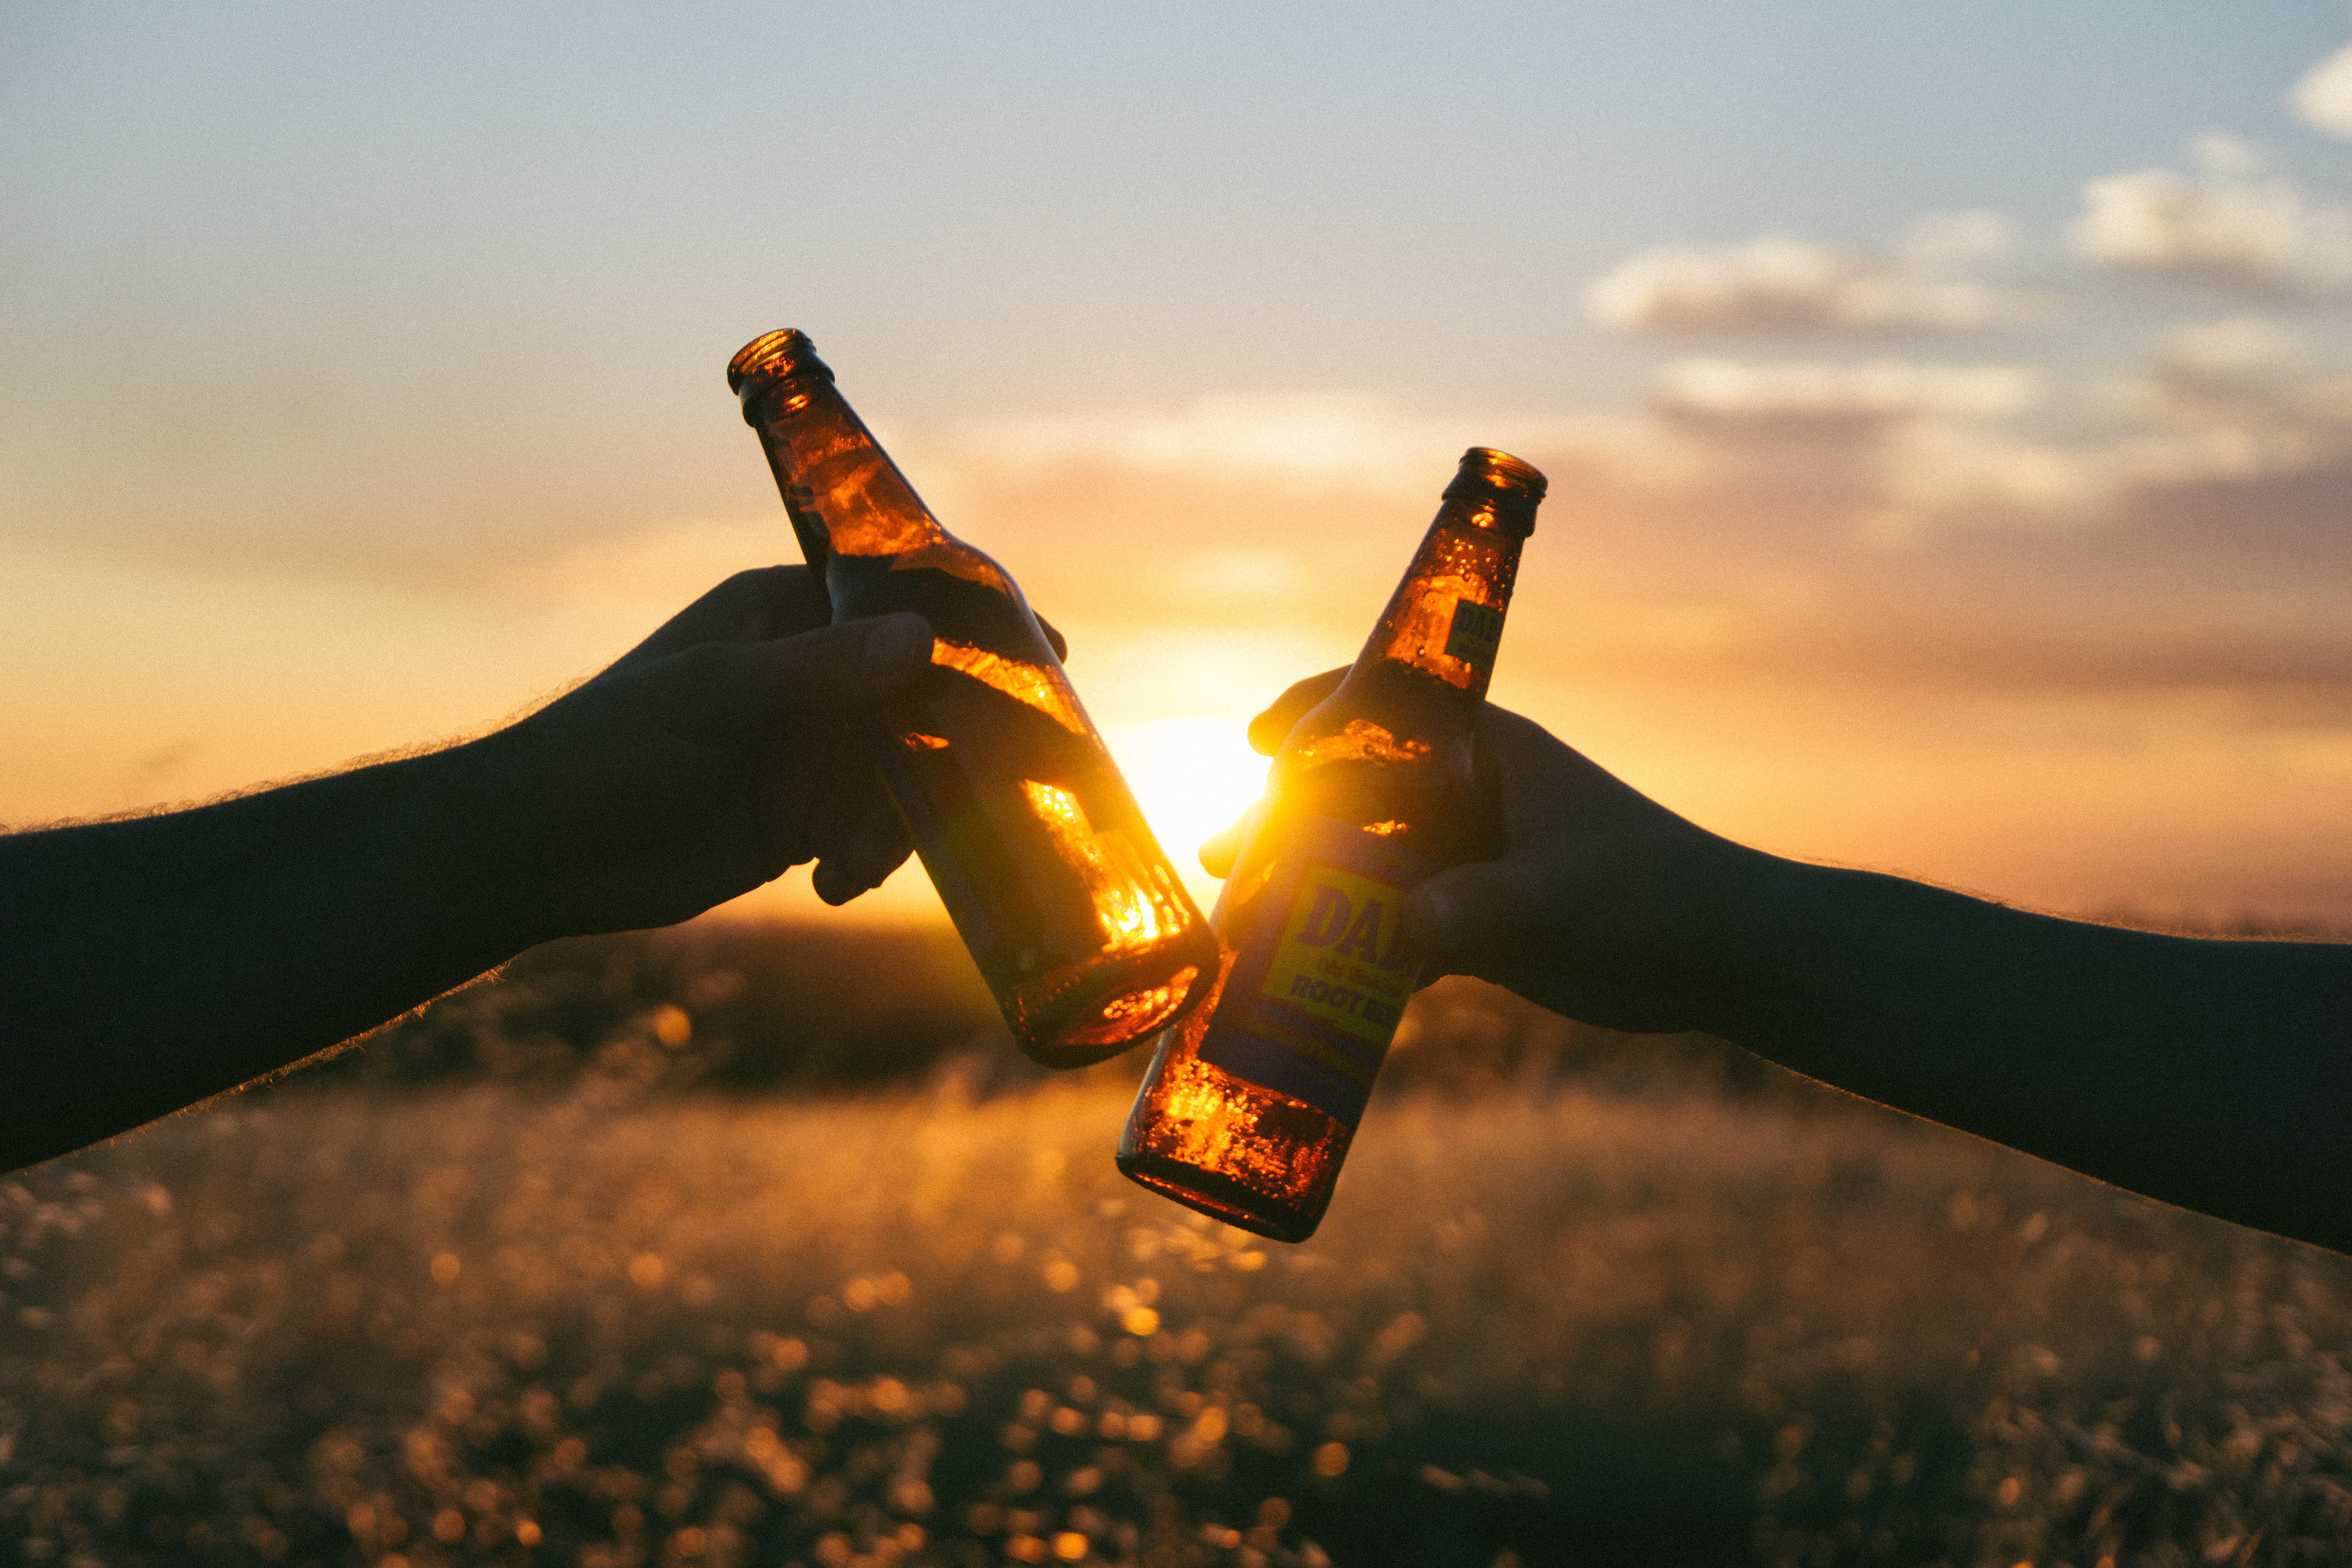 Two people 'Cheers' a bottle of beer each against a setting sun